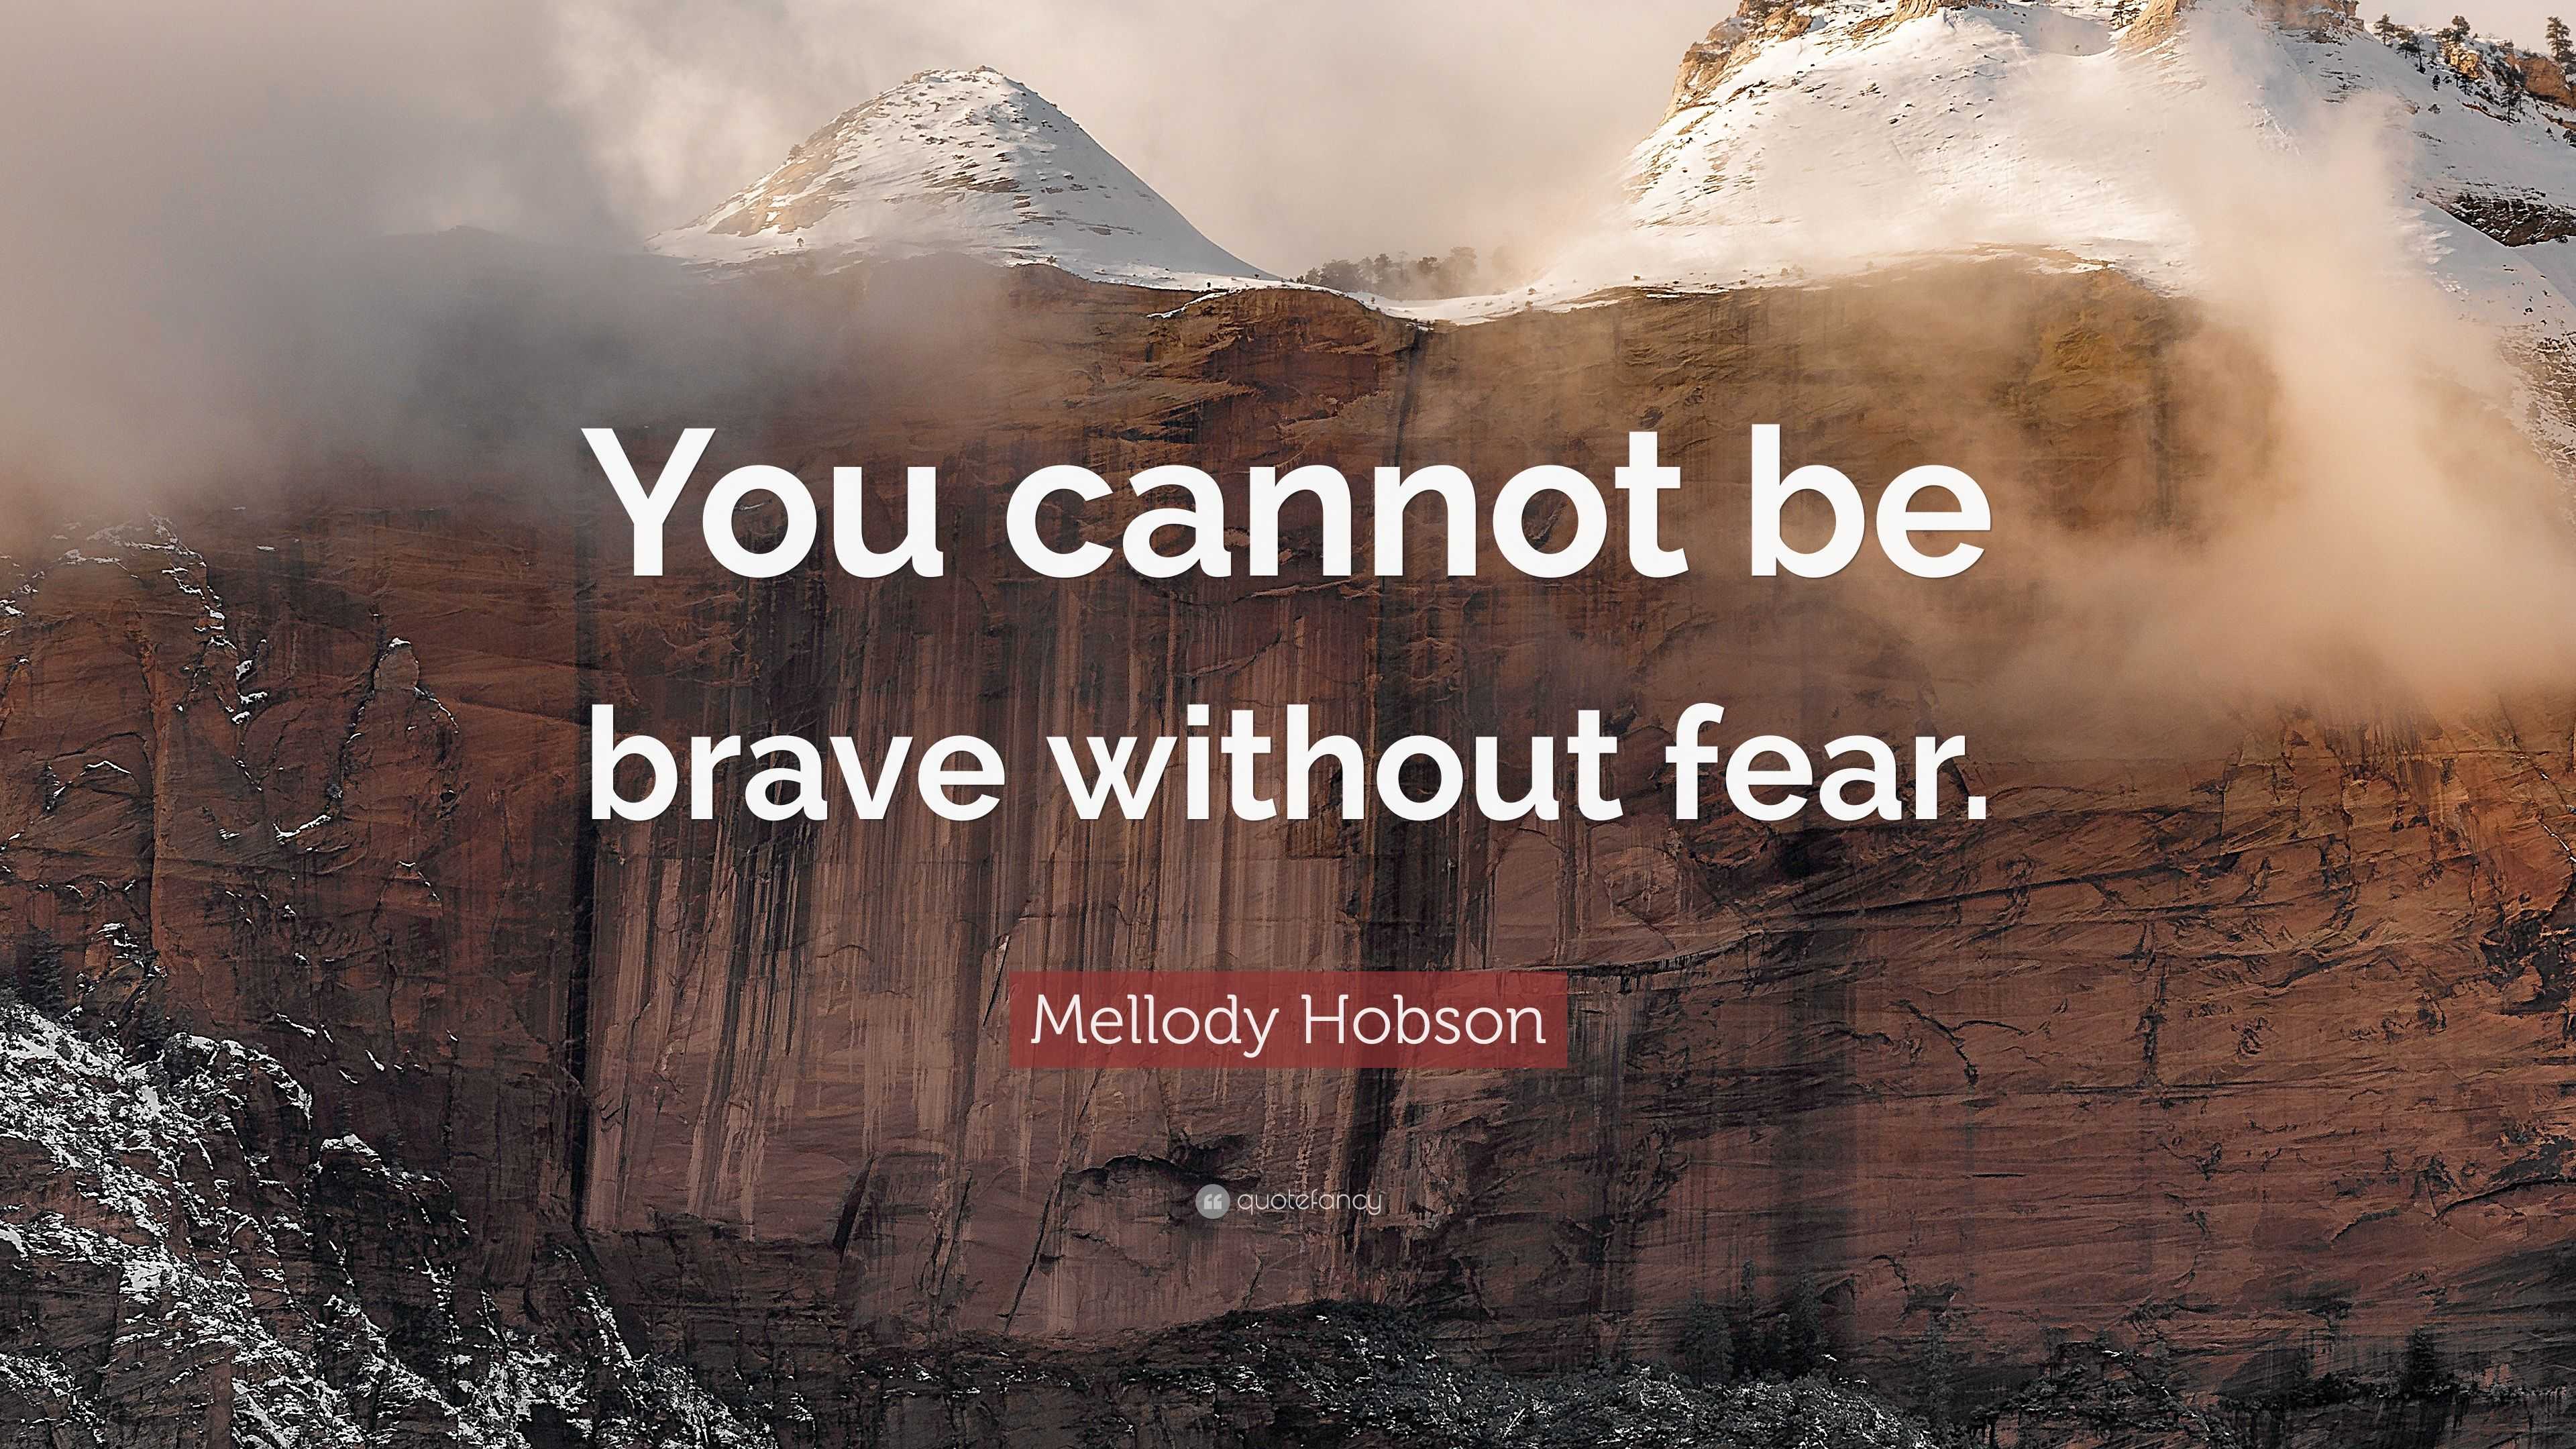 Mellody Hobson Quote: “You cannot be brave without fear.”